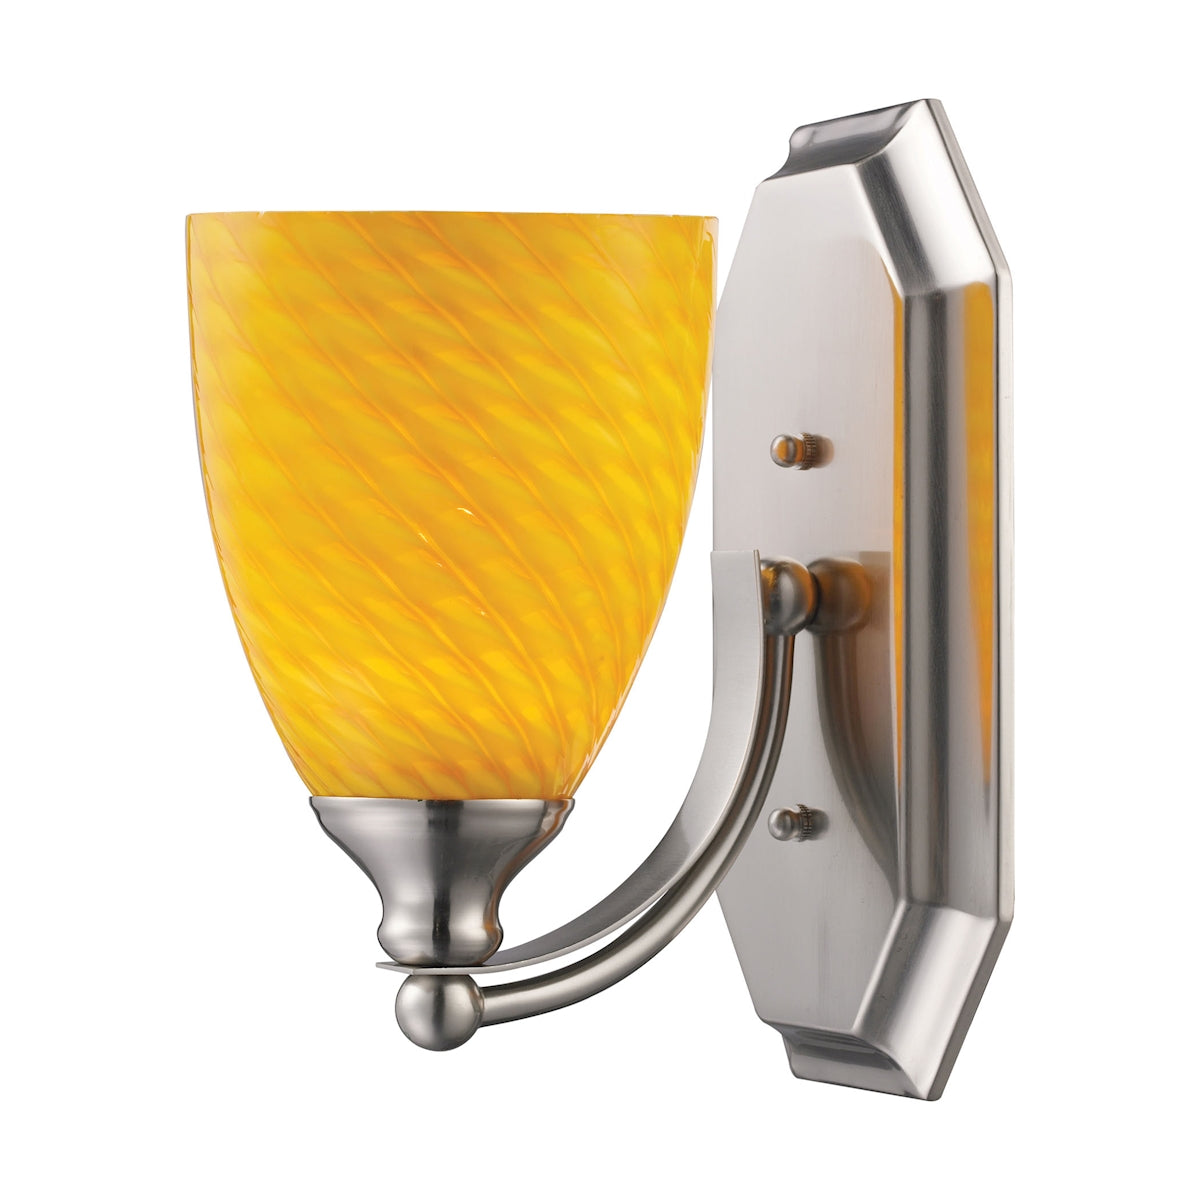 ELK Lighting 570-1N-CN Mix-N-Match Vanity 1-Light Wall Lamp in Satin Nickel with Canary Glass